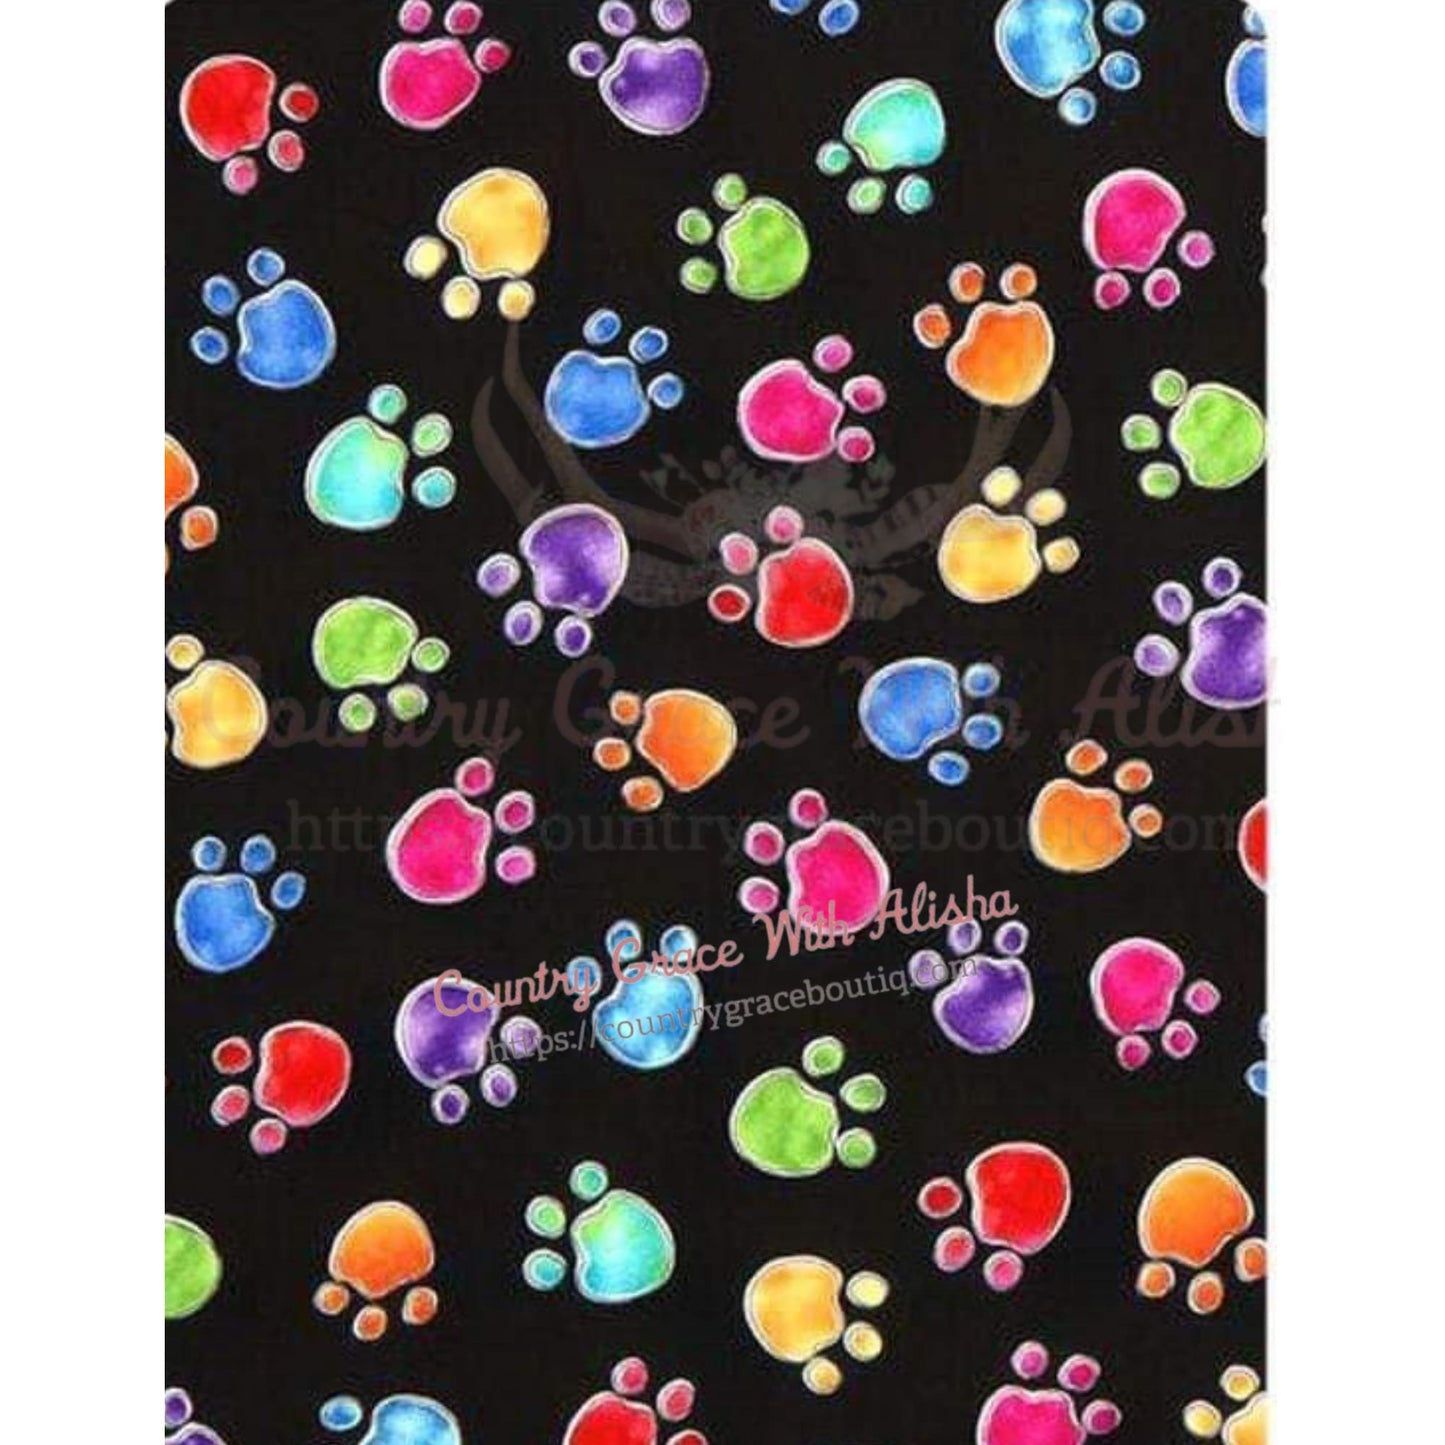 Paw Print Full Page Sublimation Transfer - Sub $2.50 Country